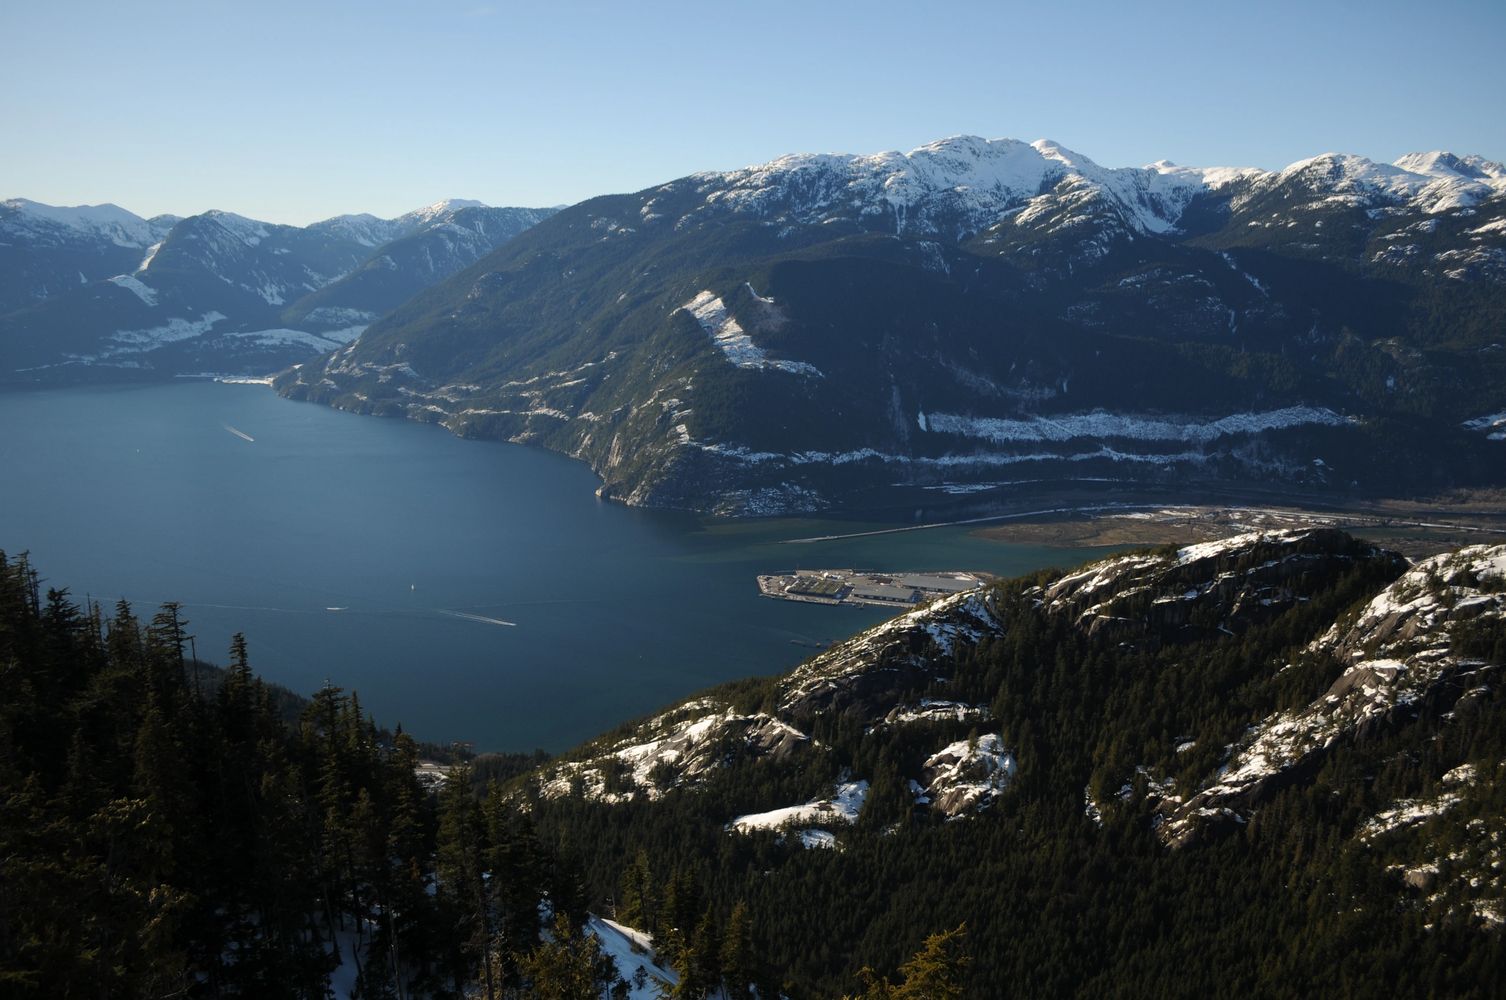 Squamish BC, from the Sea to Sky Gondola. Photo by Jack McKague
